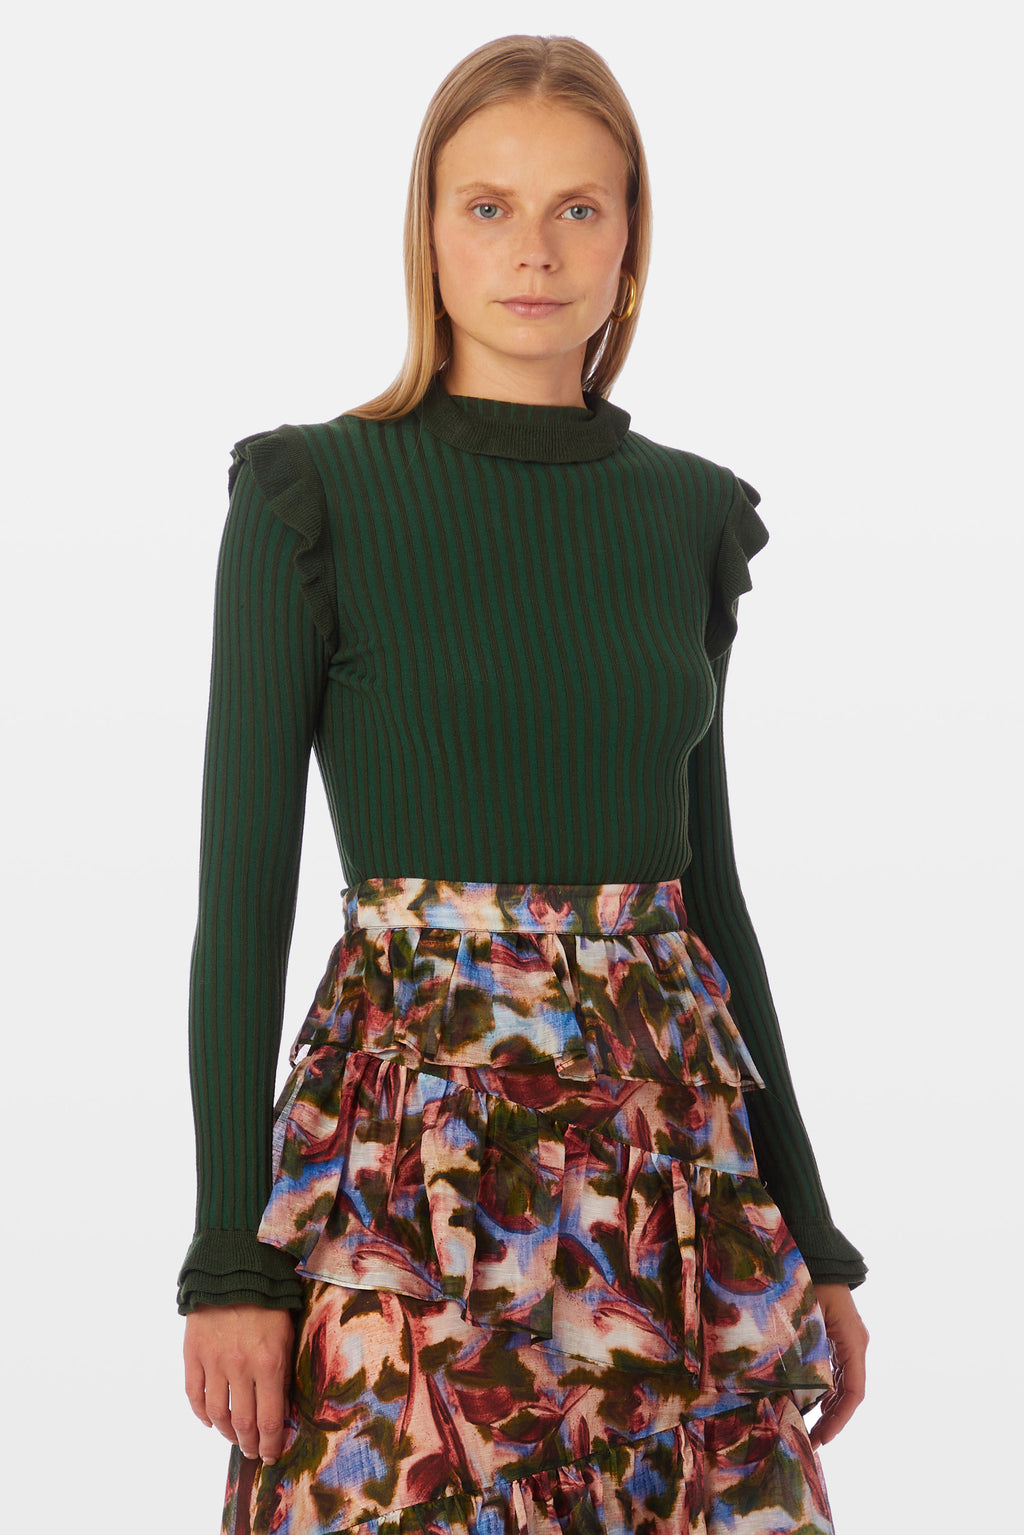 Green turtleneck with ruffle details on shoulders and neck